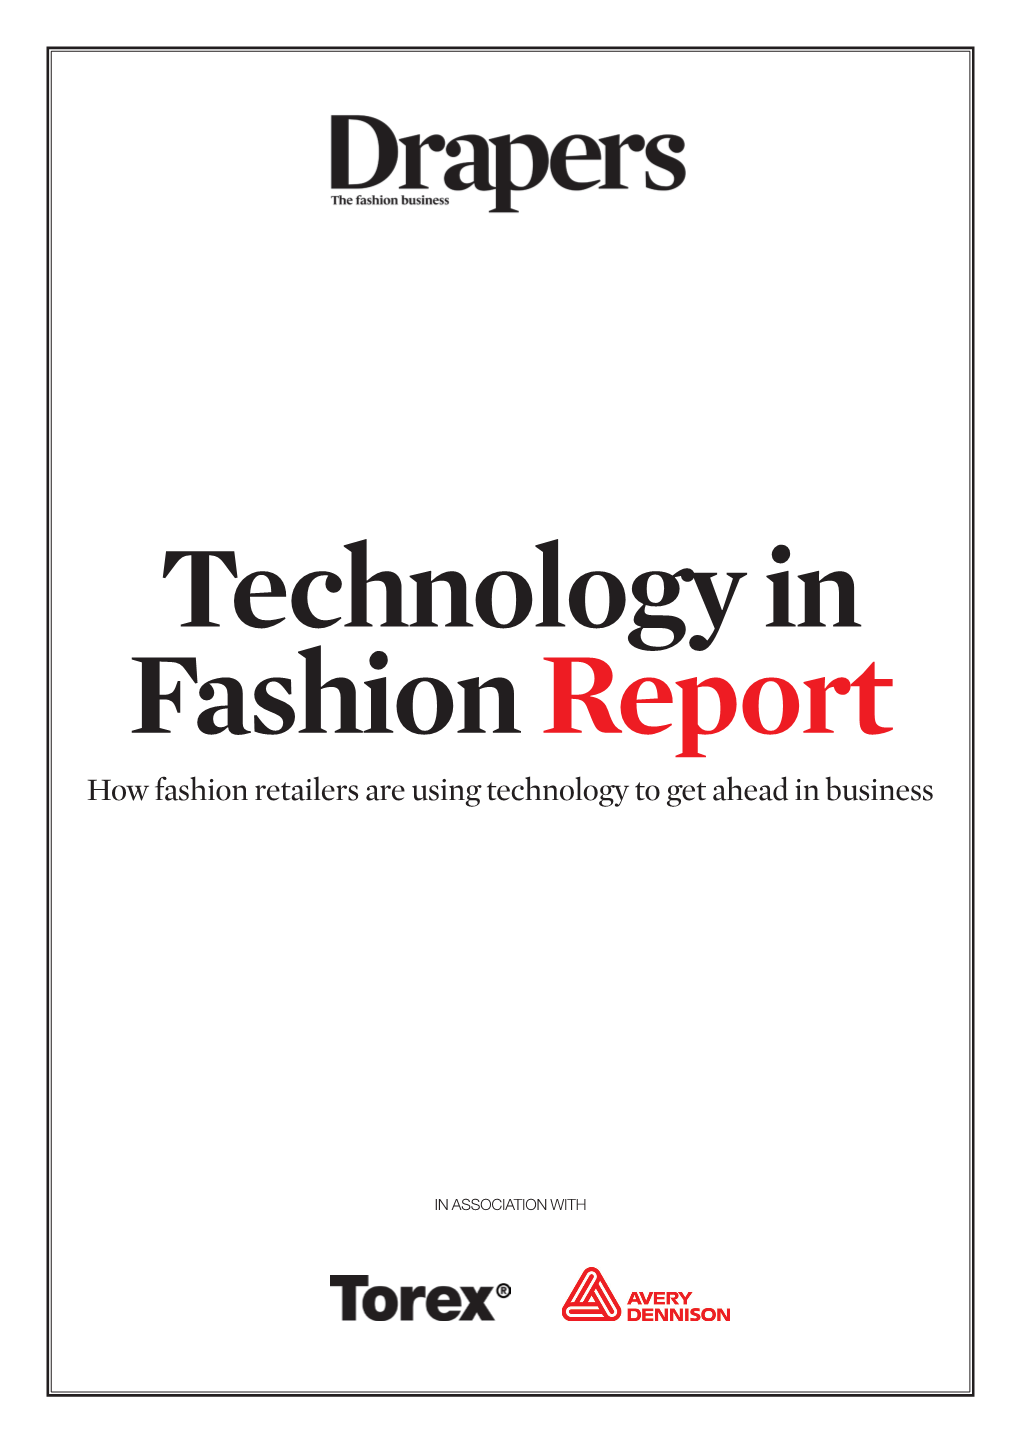 How Fashion Retailers Are Using Technology to Get Ahead in Business